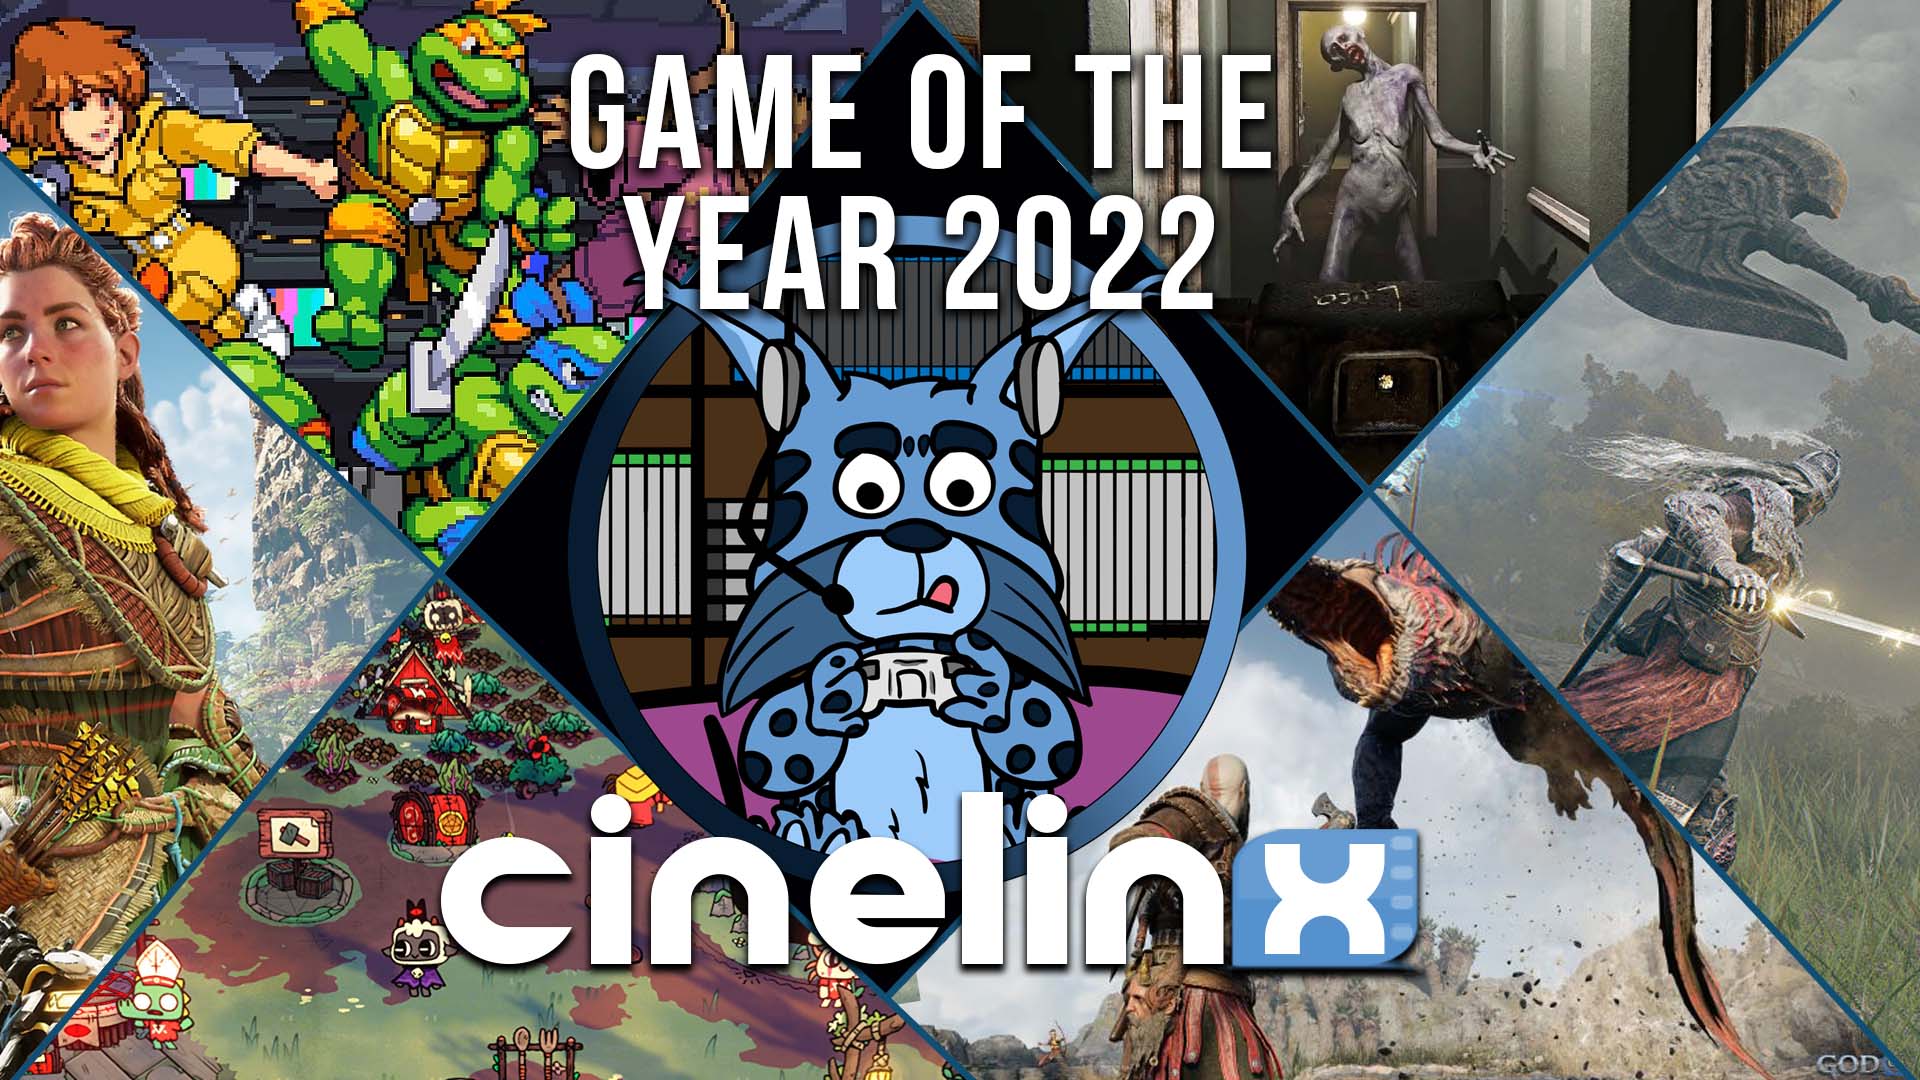 Vote: Game of the Year